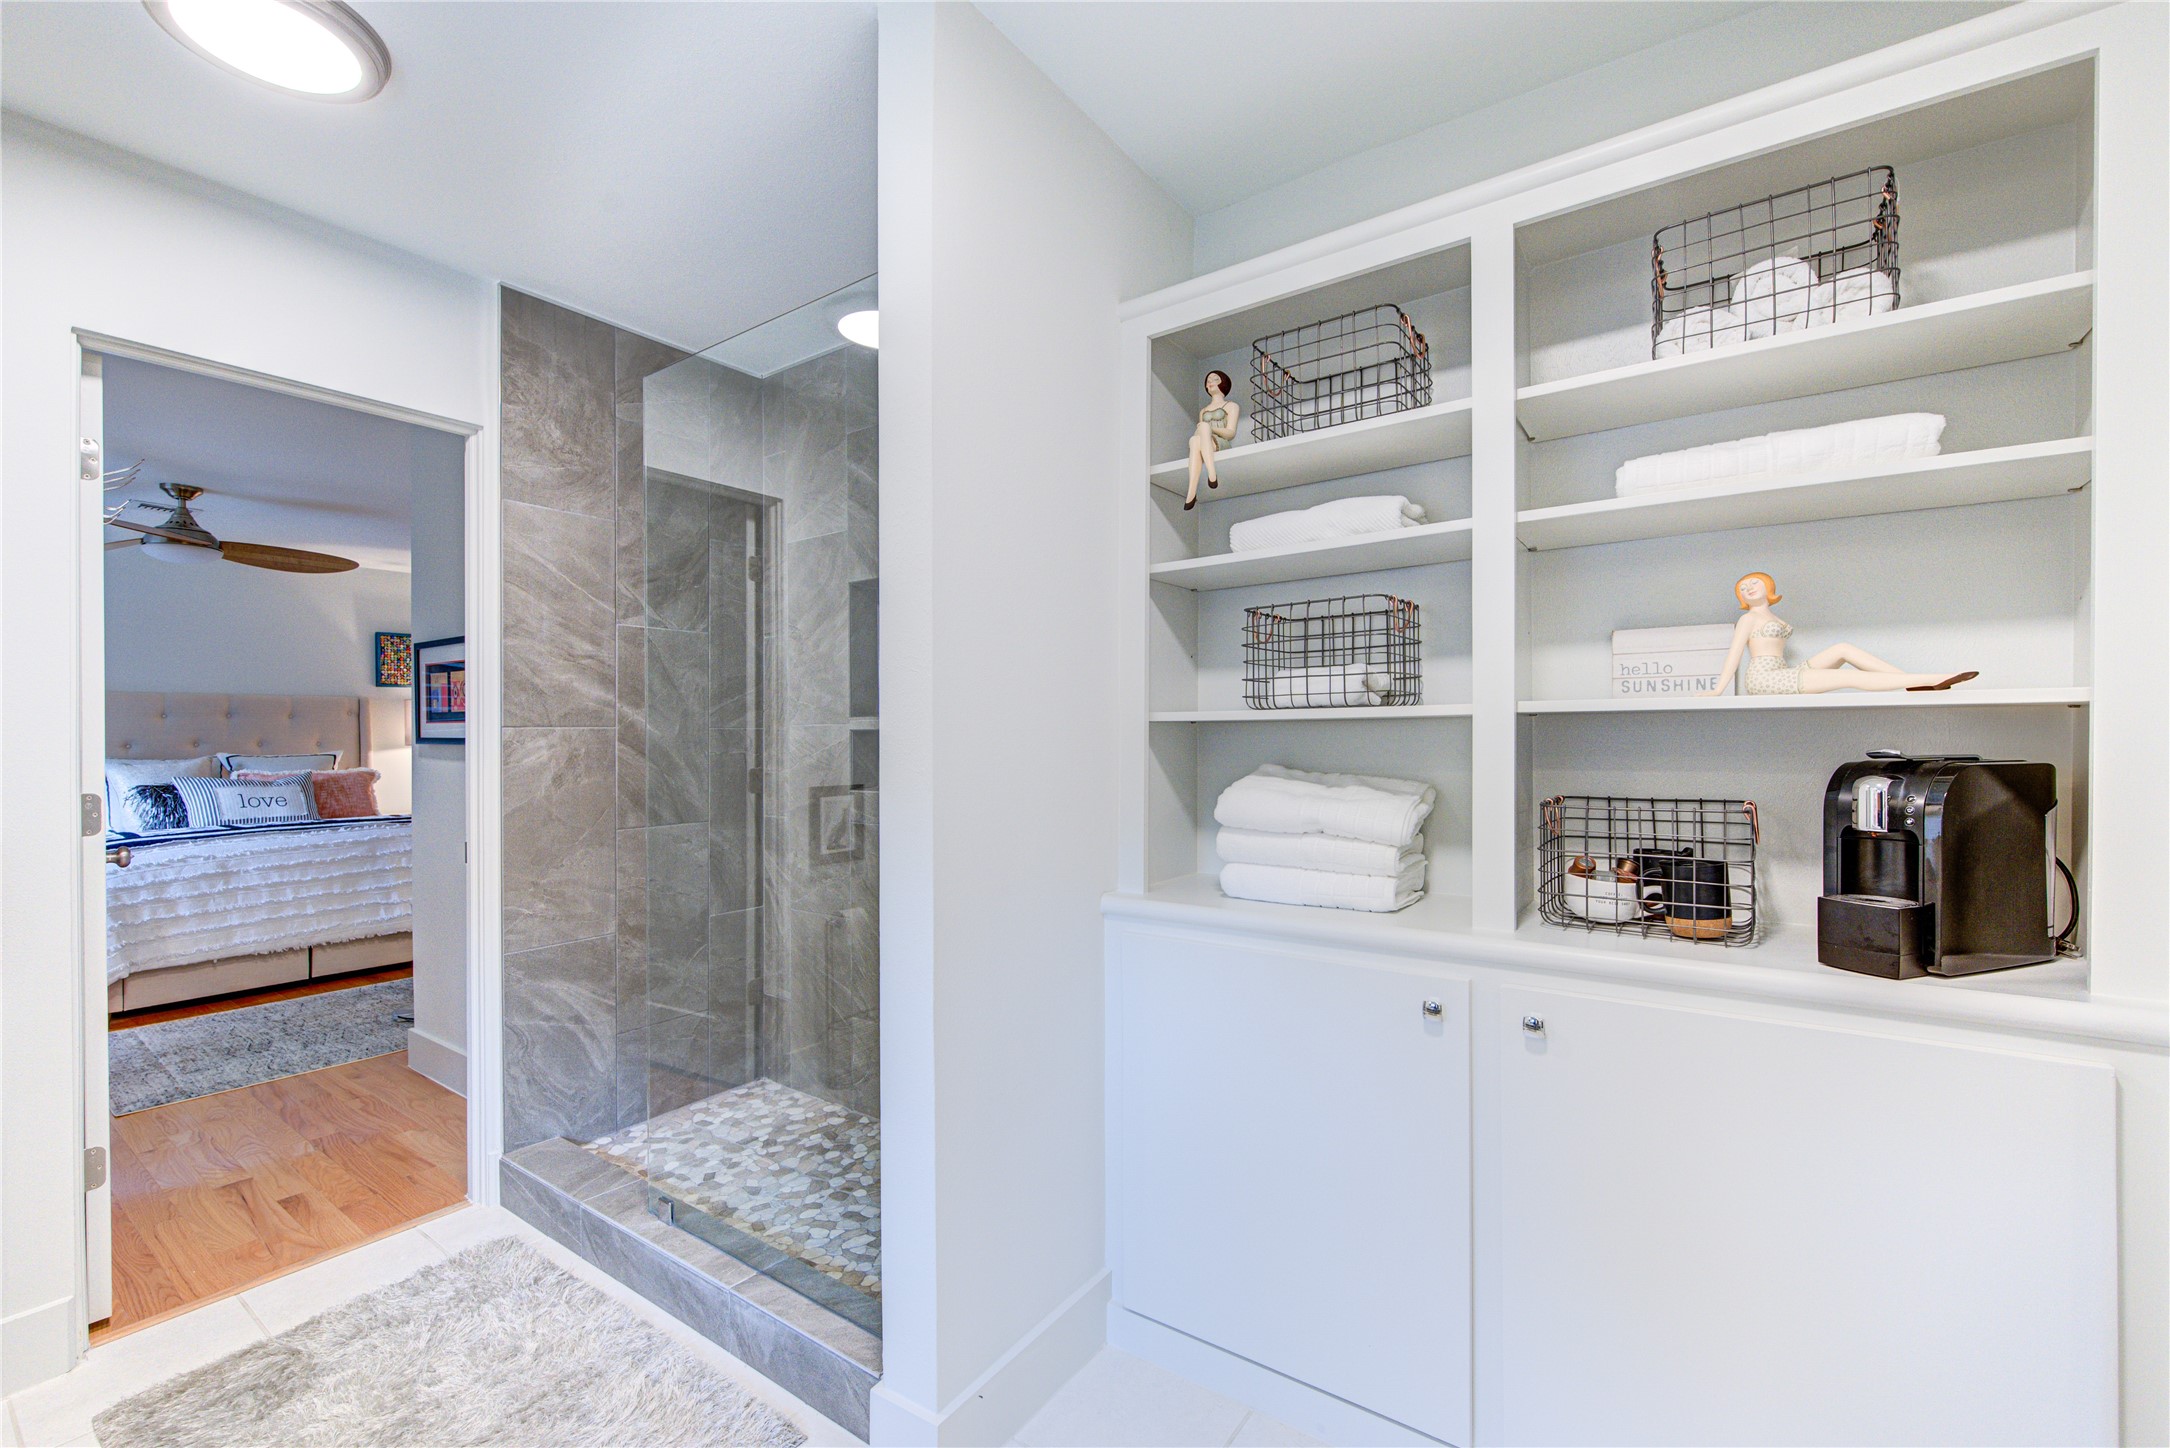 It is rare to find so much storage in a bathroom, but the former door to the bathroom has been converted into a built in cabinet with shelves for additional storage.